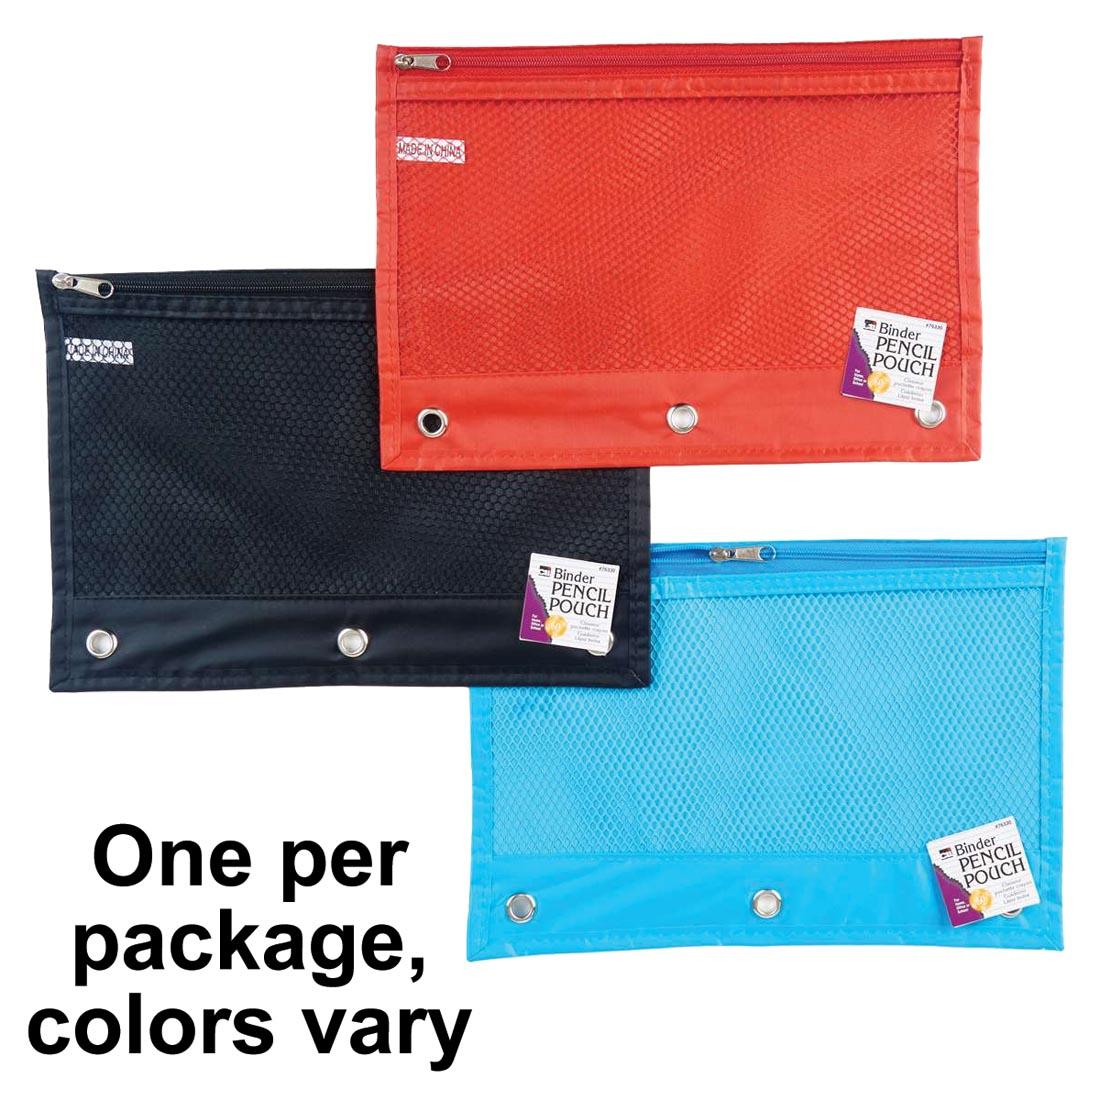 3 Mesh Binder Pencil Pouches By Charles Leonard with the text One per package, colors vary